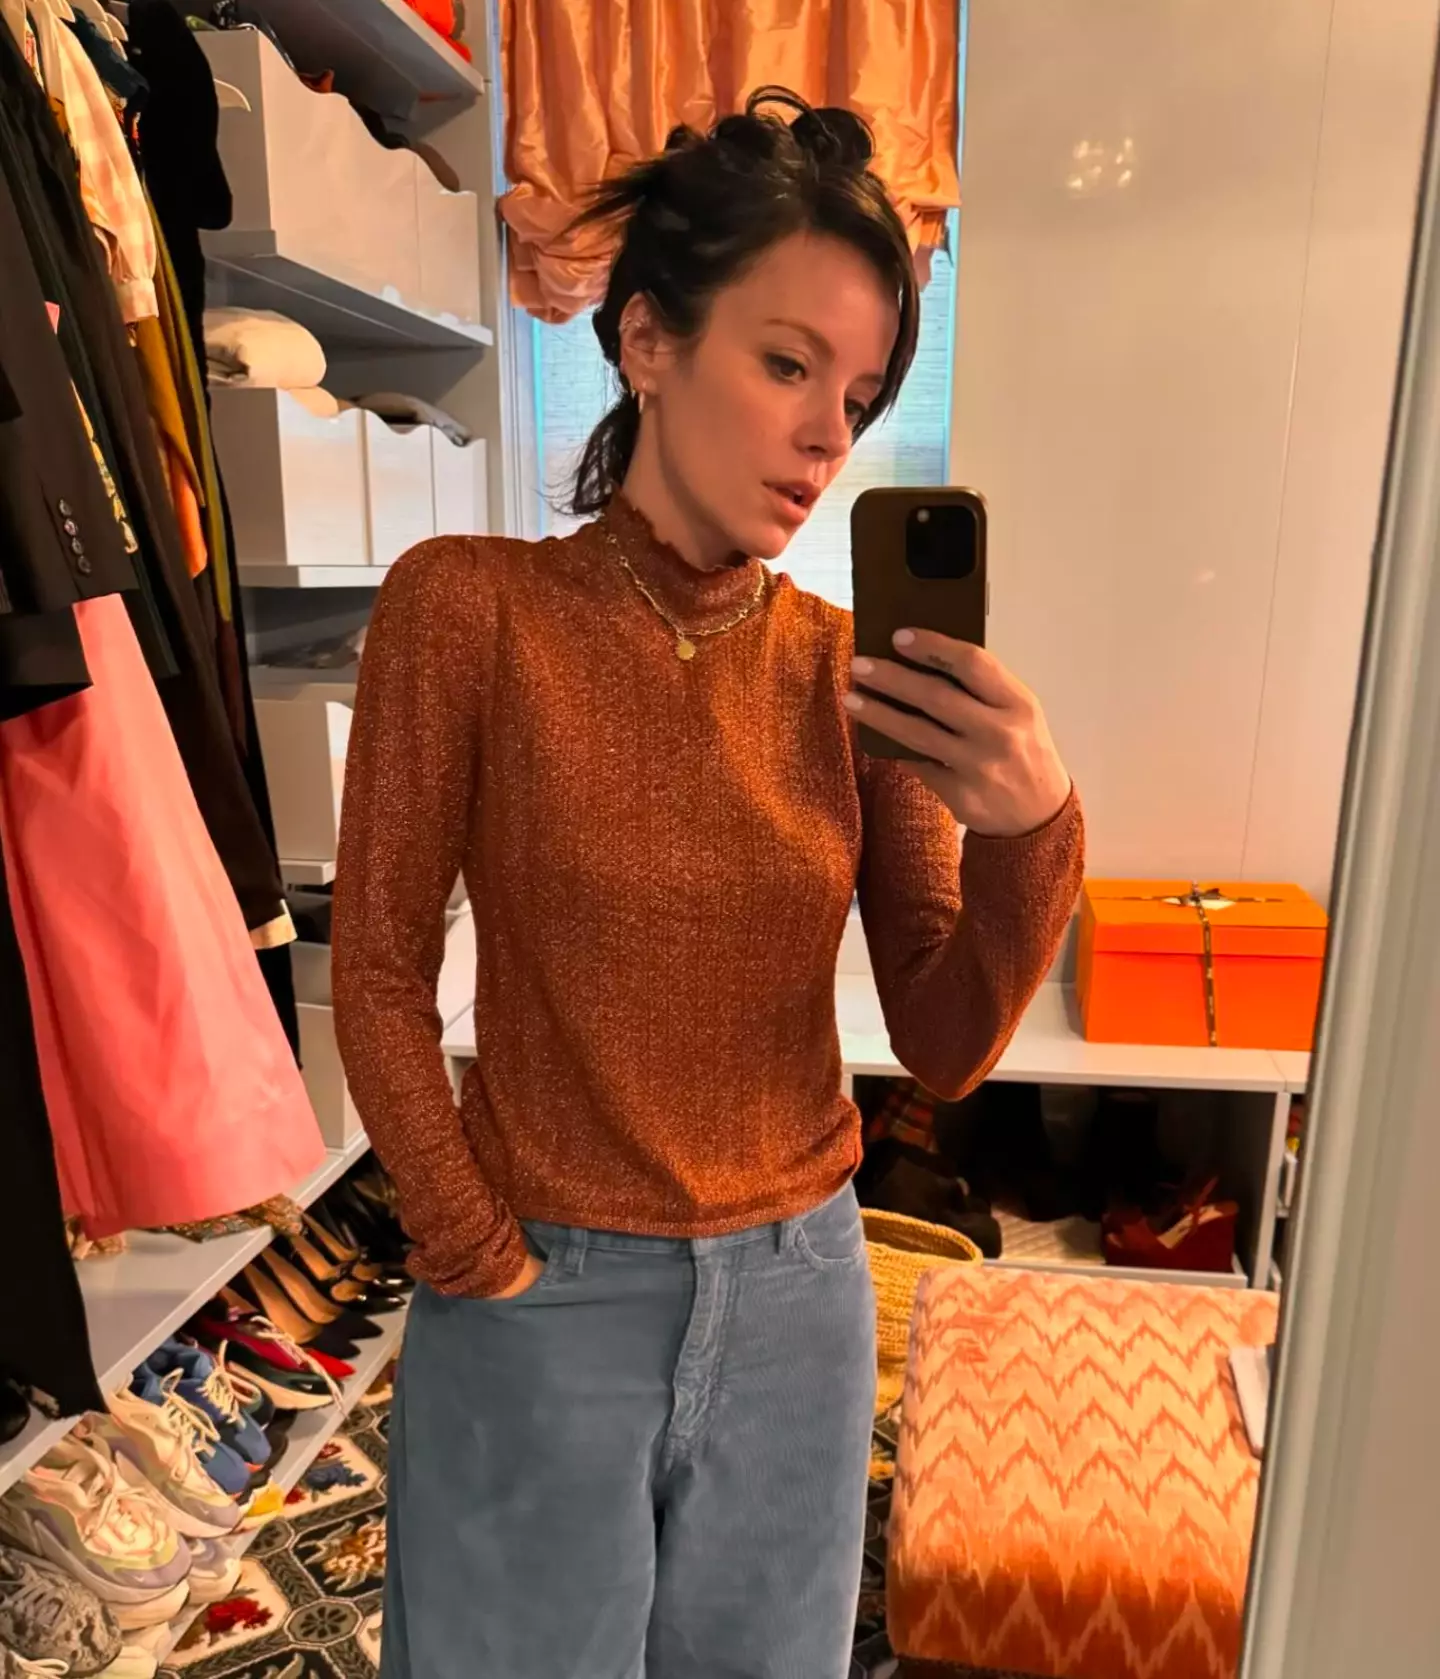 The 'Smile' singer revealed she would be leaving 'everything' to her and Sam Cooper's children. (Instagram/@lilyallen)